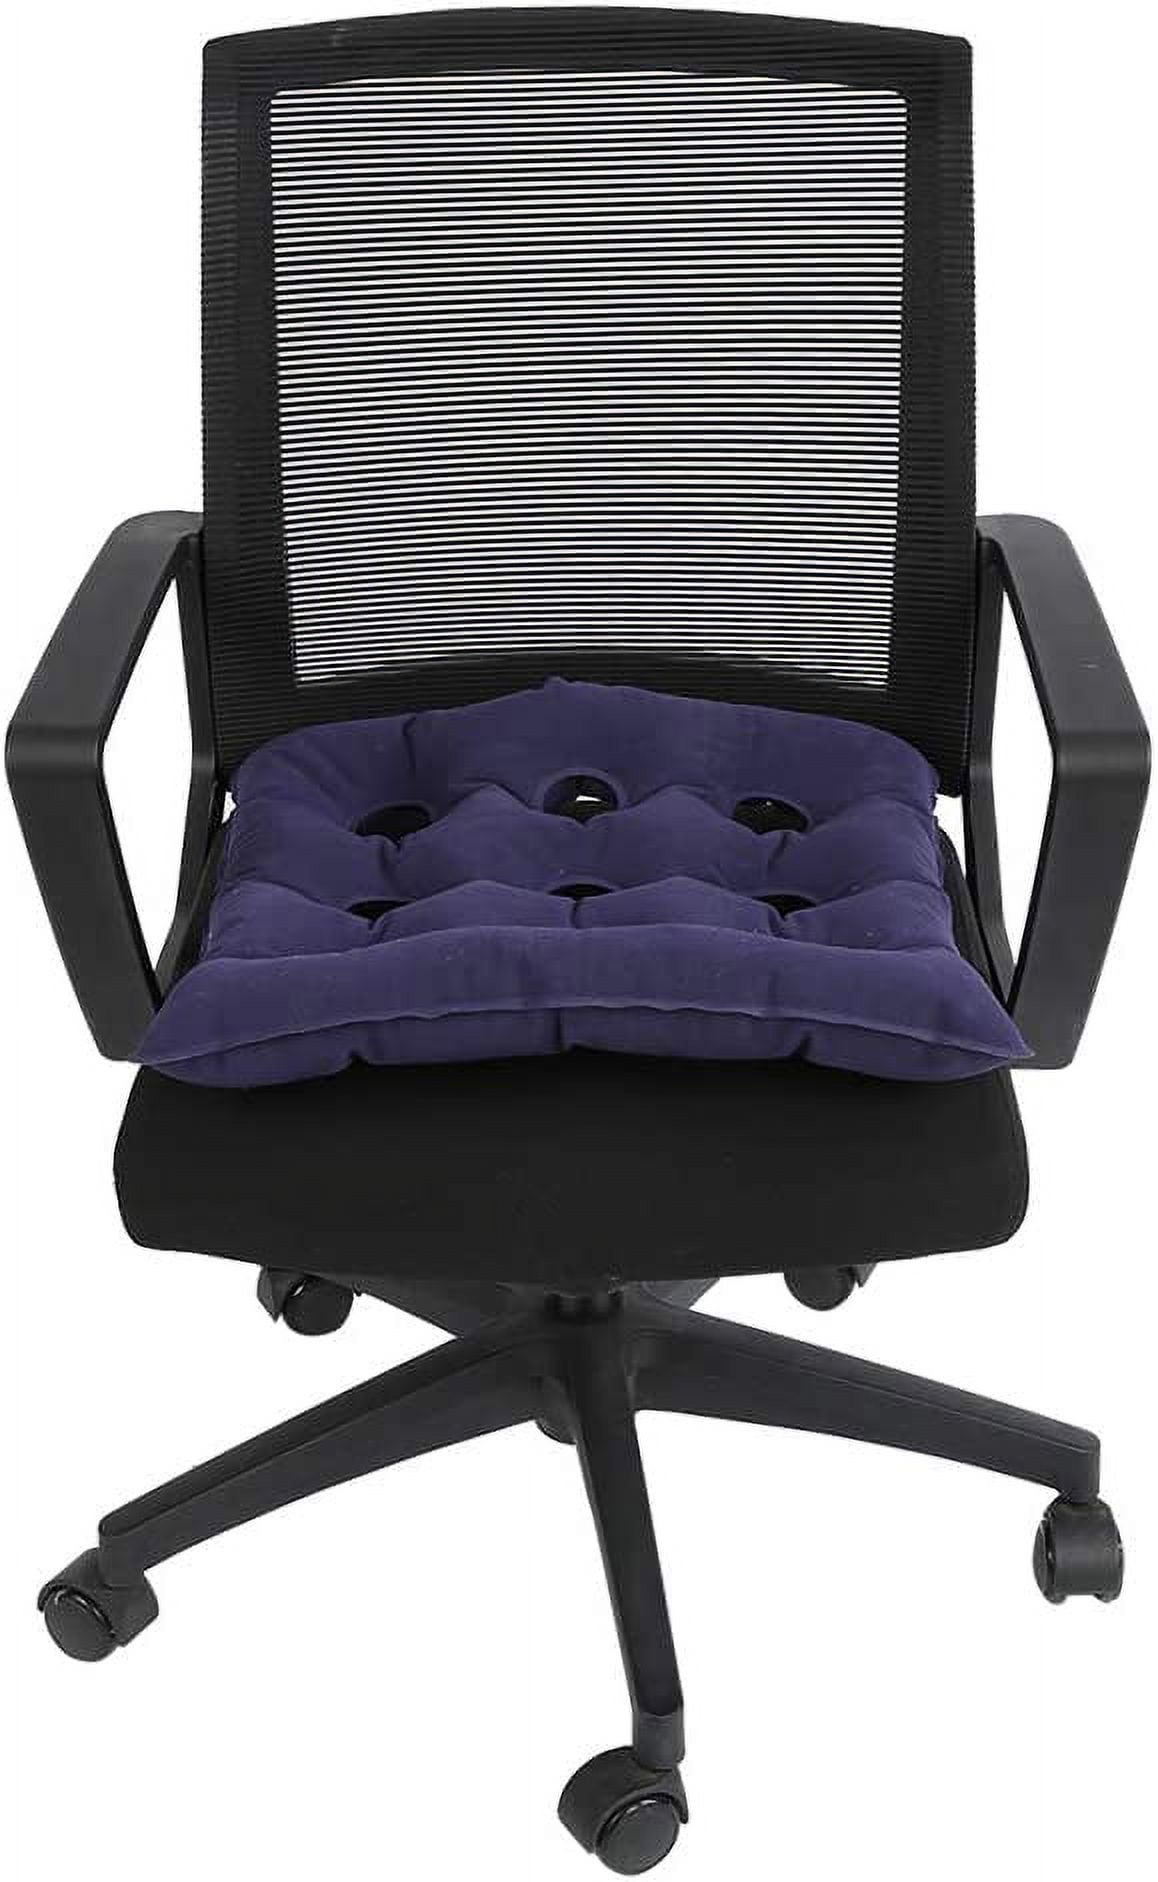 SUNSHINE-MALL Office Chair Cushions, air Cushion seat, sit Cushion, with  air Vent, can be a Small Amount of air or Water, Very Suitable for Office